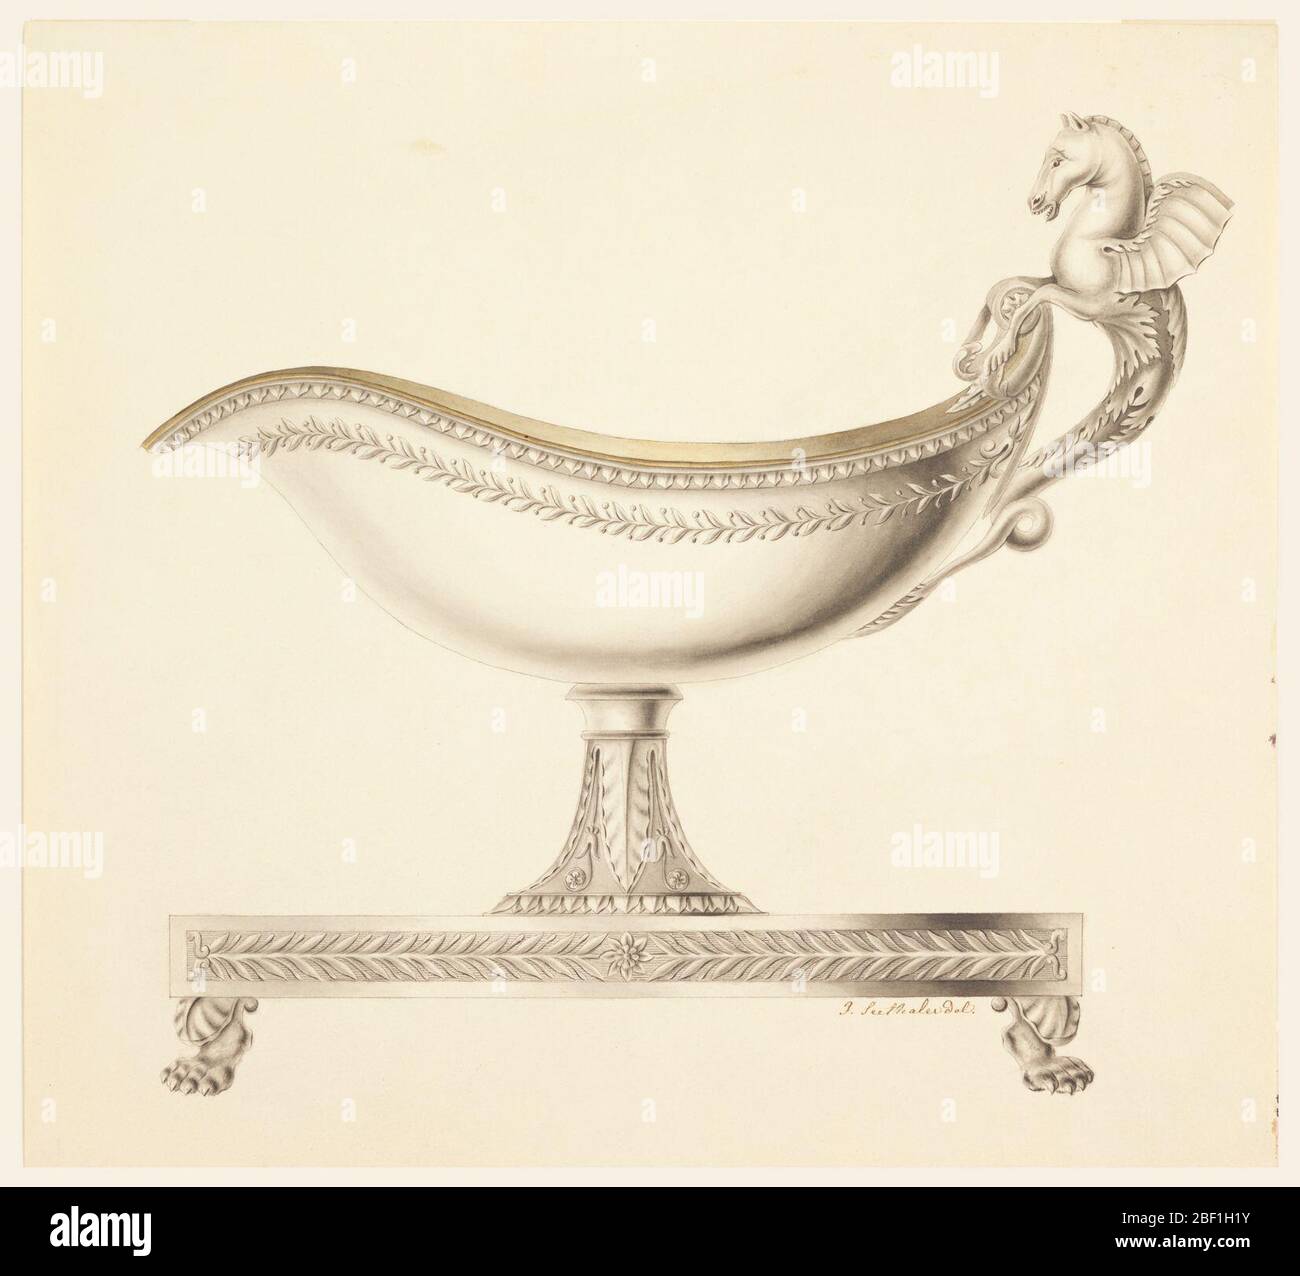 Elevation of a Sauce Boat. The sauceboat is made of gilded silver